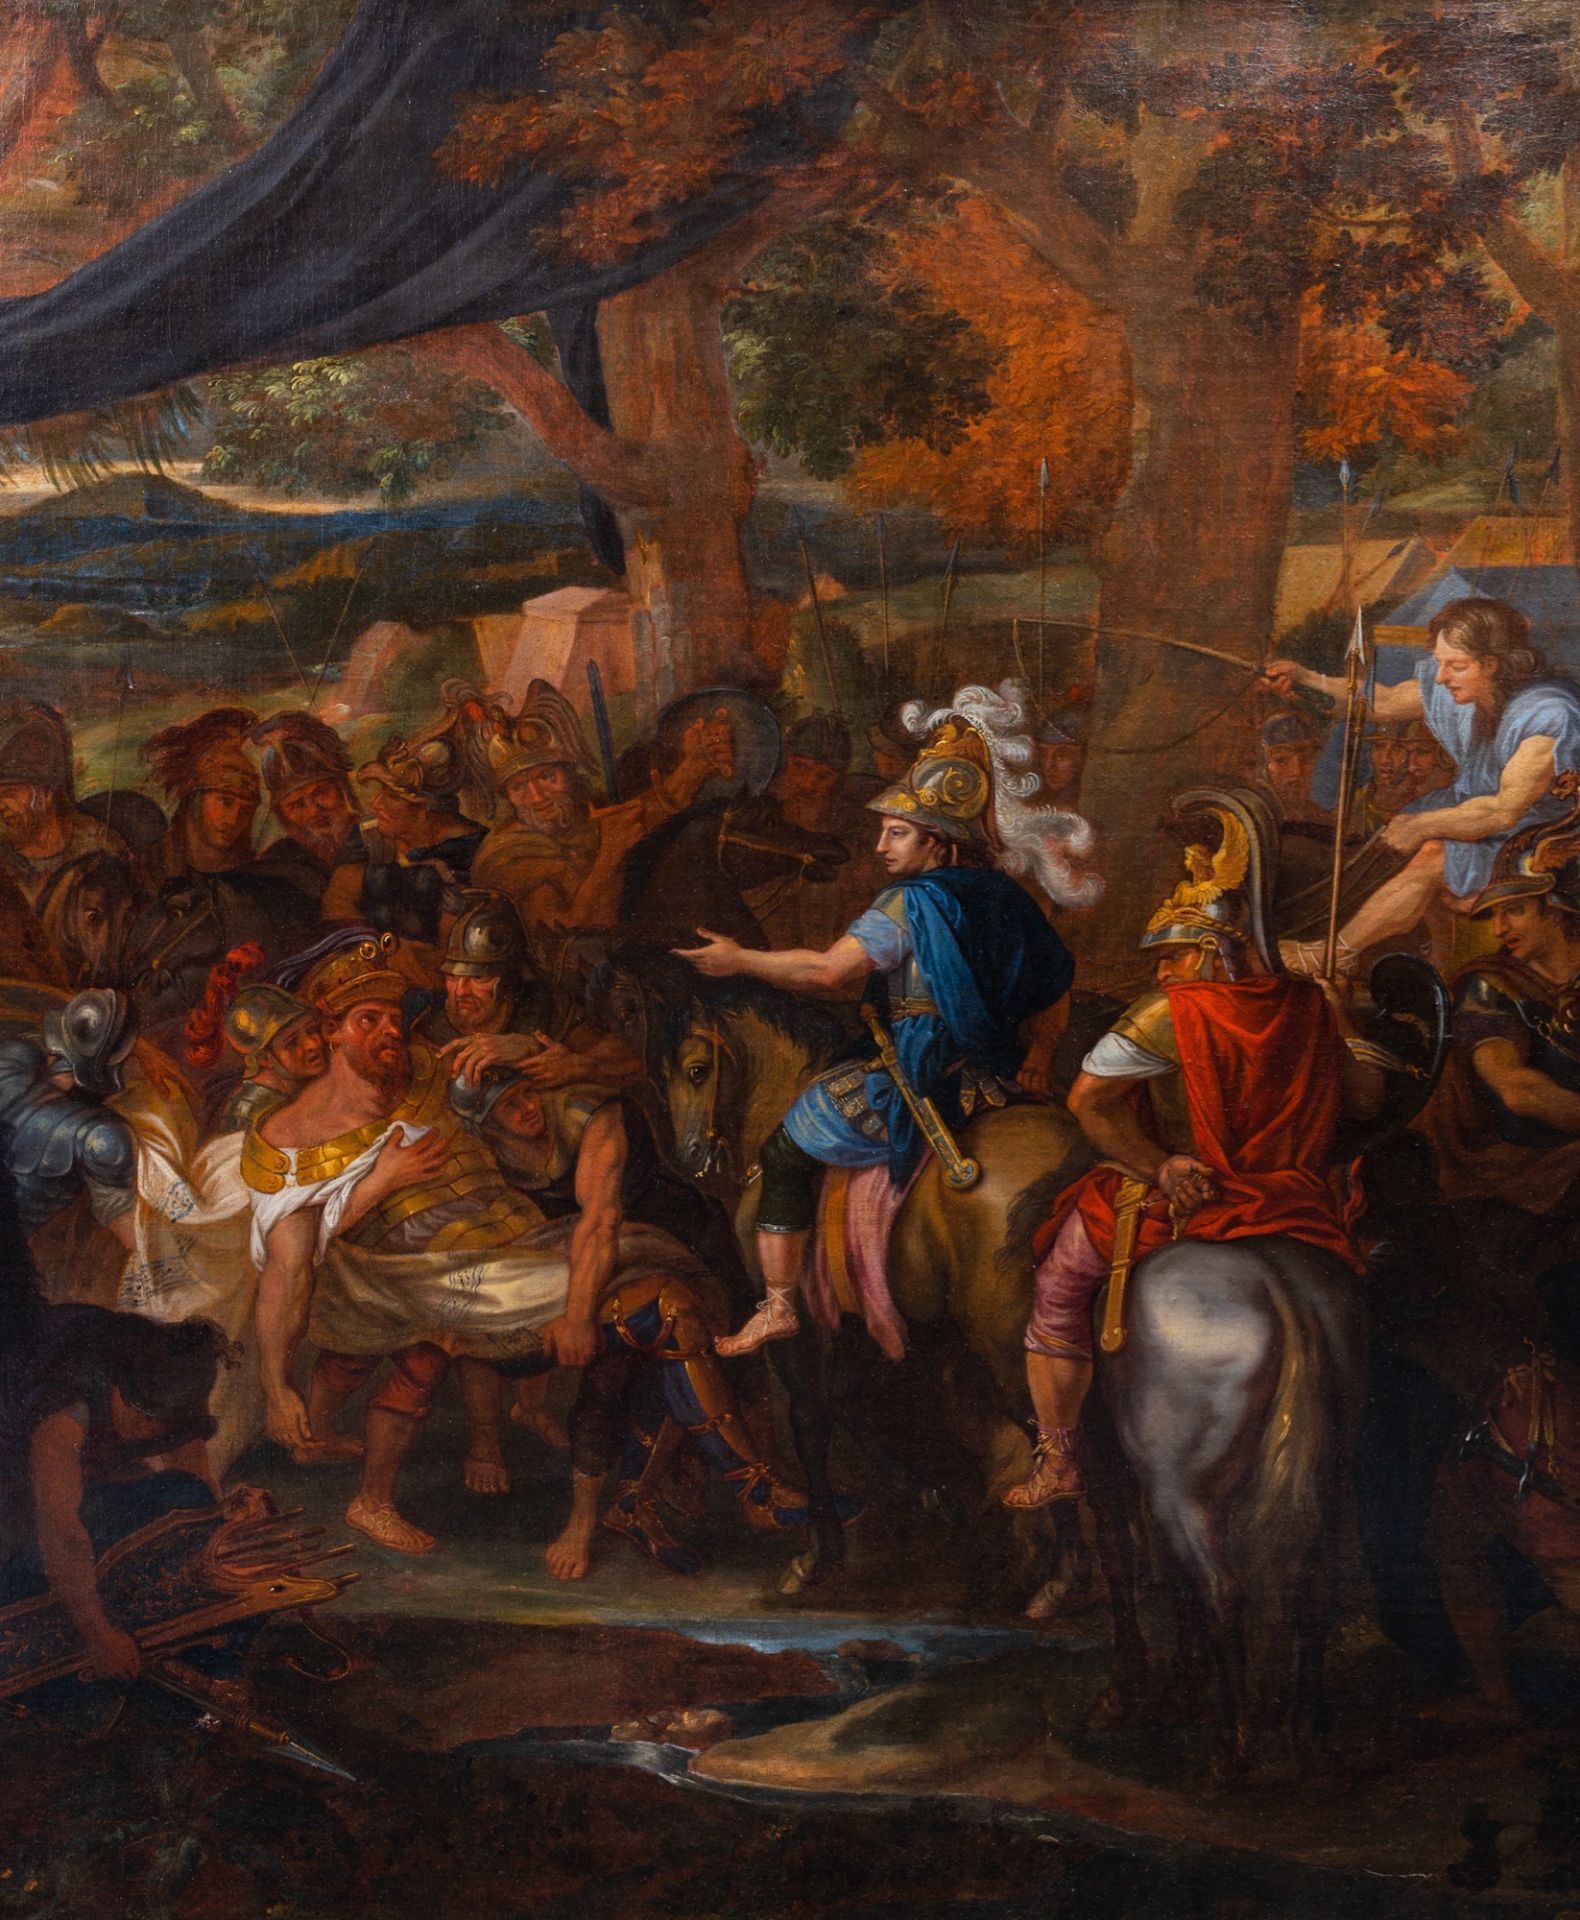 French school, workshop of Charles le Brun (1619-1690): Alexander and Poros in the Battle of Hydaspe - Image 7 of 24